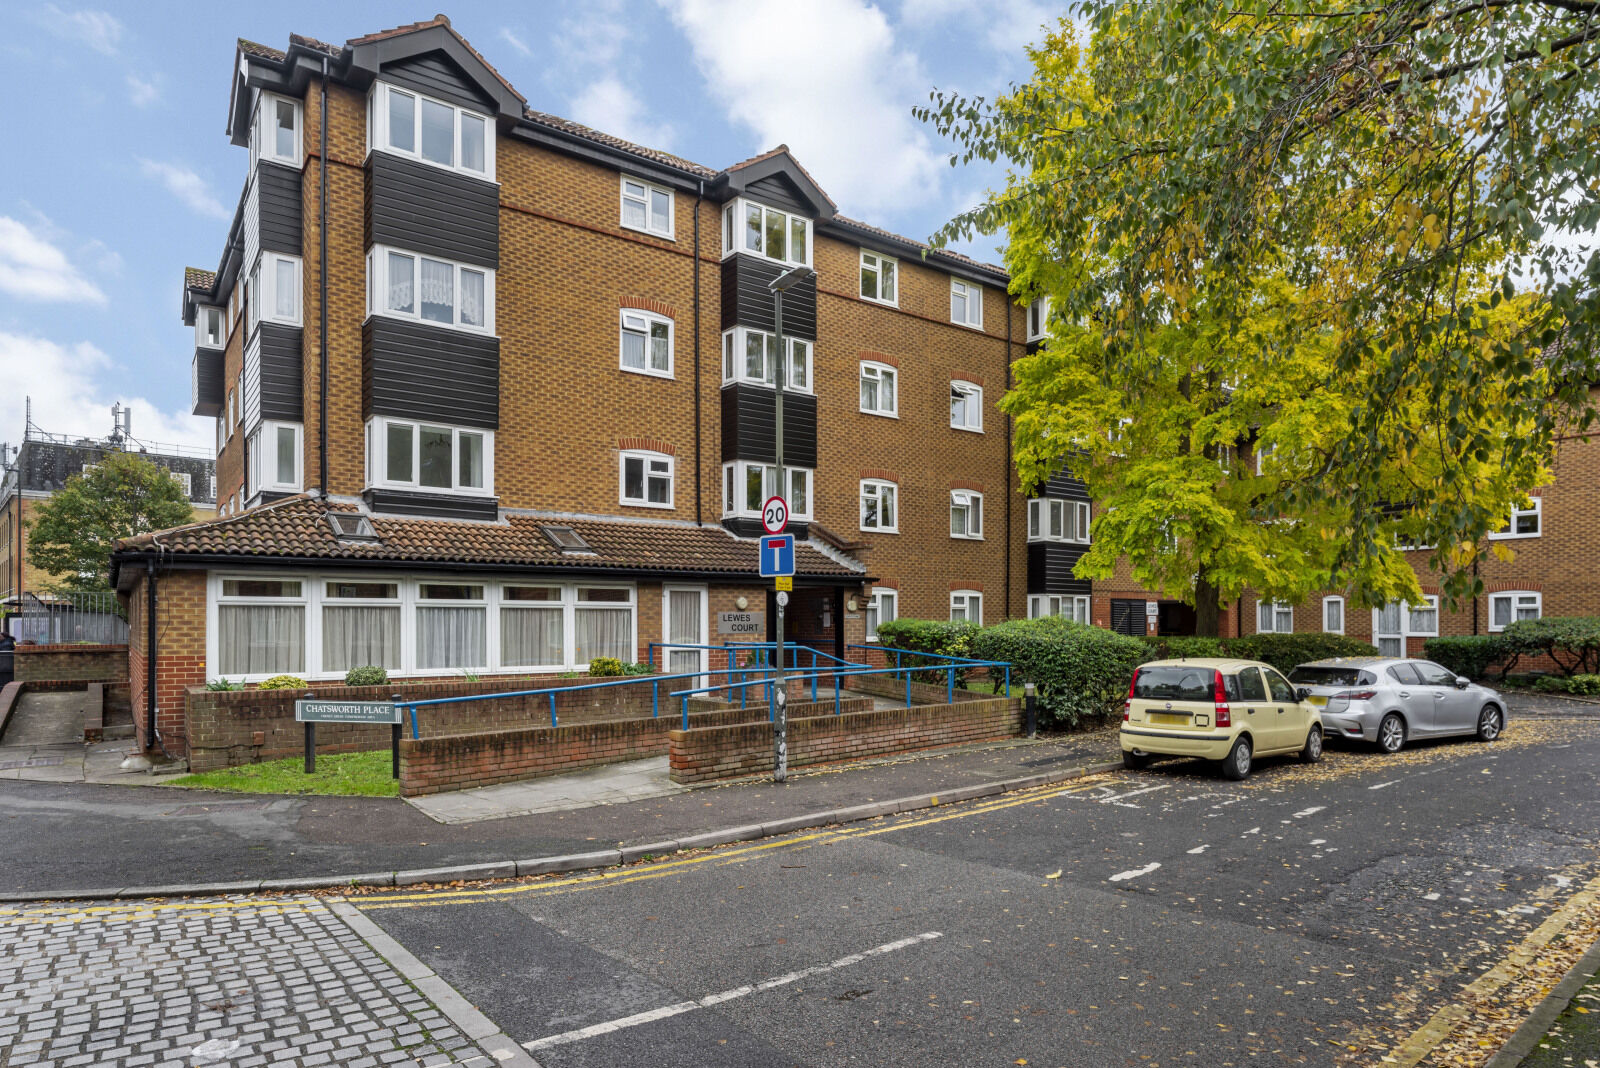 2 bedroom  flat for sale Chatsworth Place, Mitcham, CR4, main image